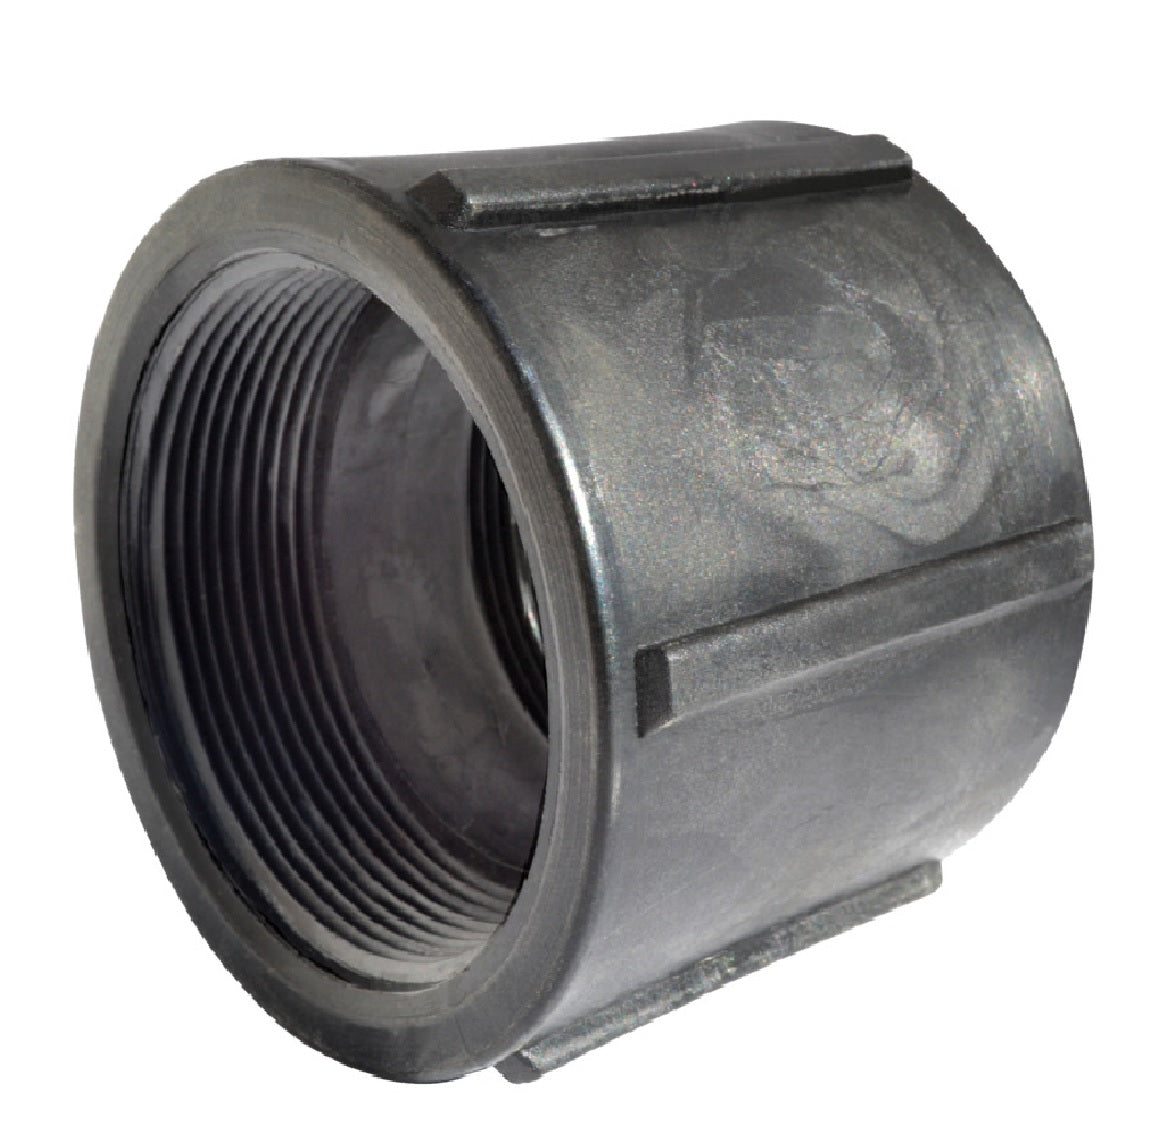 Green Leaf CPLG100 Heavy-Duty Coupling, Black